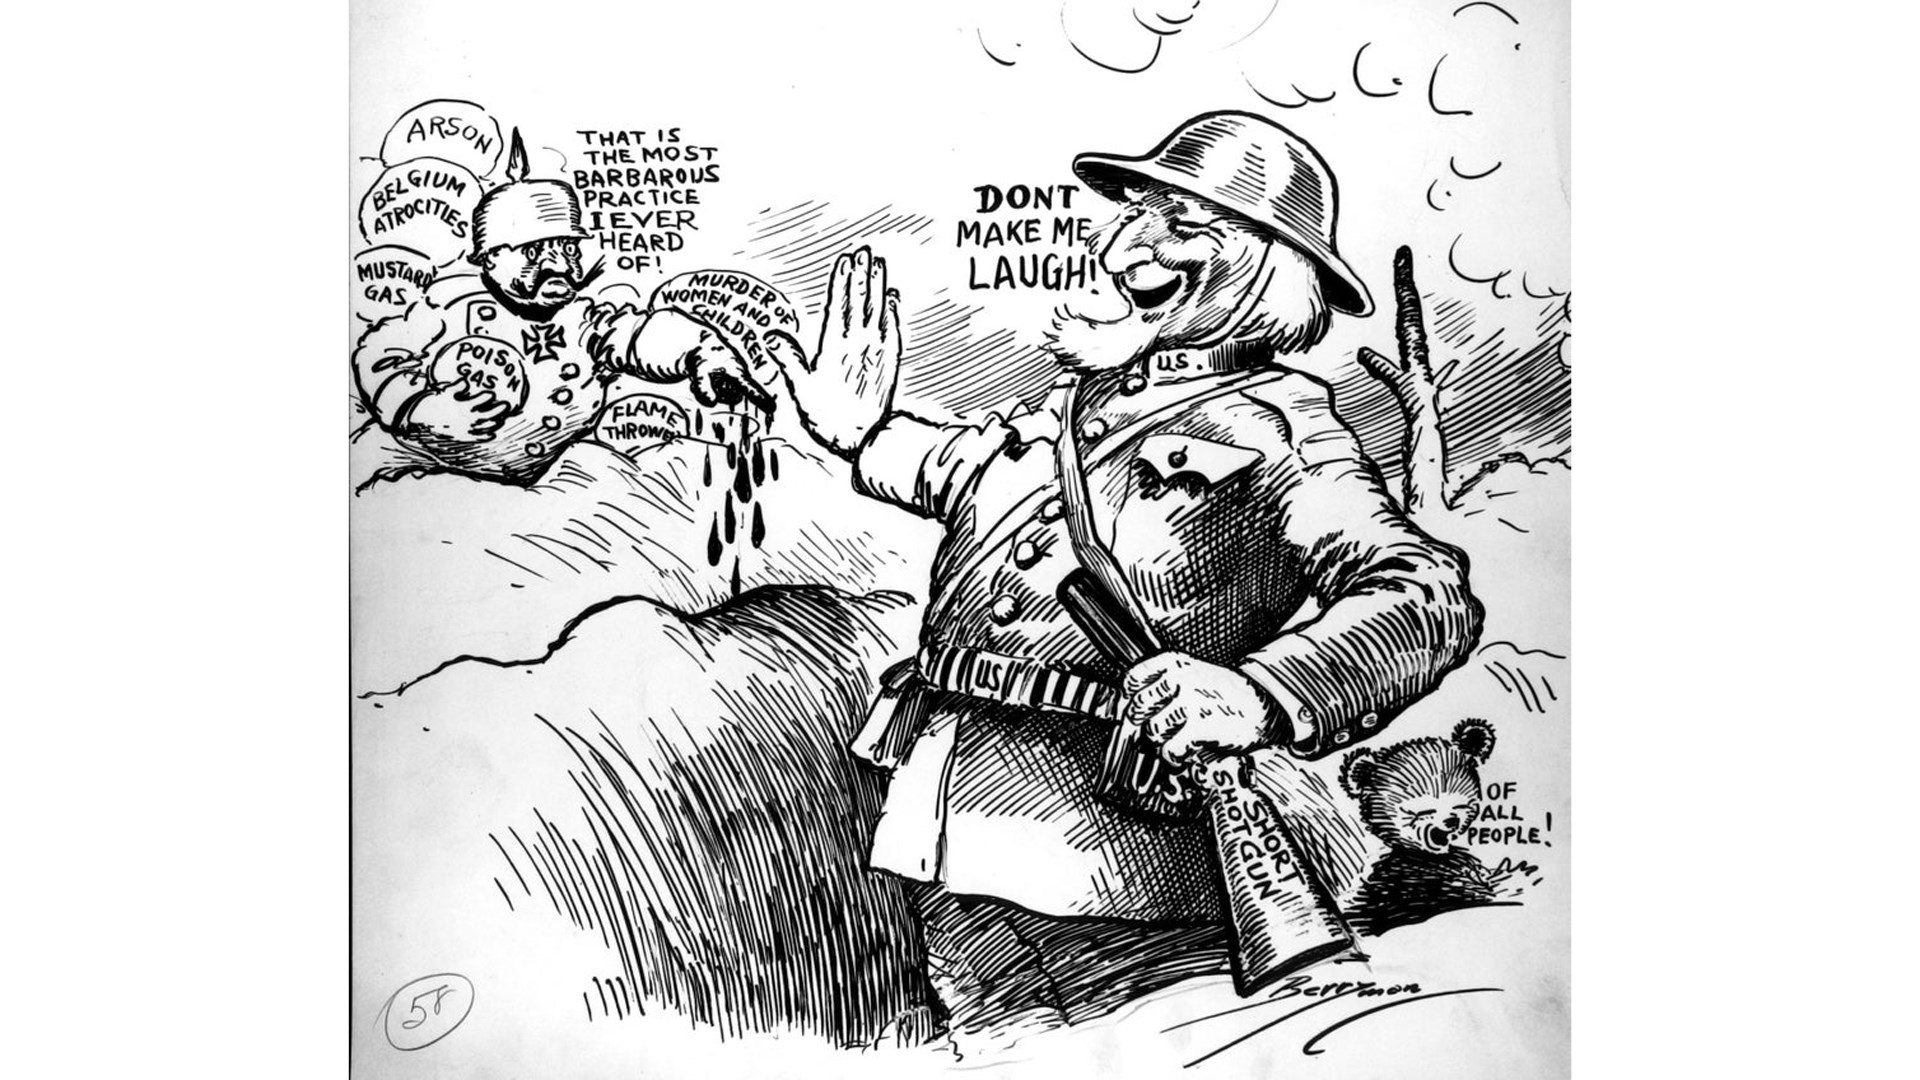 The American public generally regarded the German protest on the use of shotguns to be absurd hypocrisy, with this cartoonist capturing the mood quite cleverly. In the drawing, Uncle Sam is lucky enough to have a cartridge belt for his shot shells, something the Doughboys unfortunately did not receive.